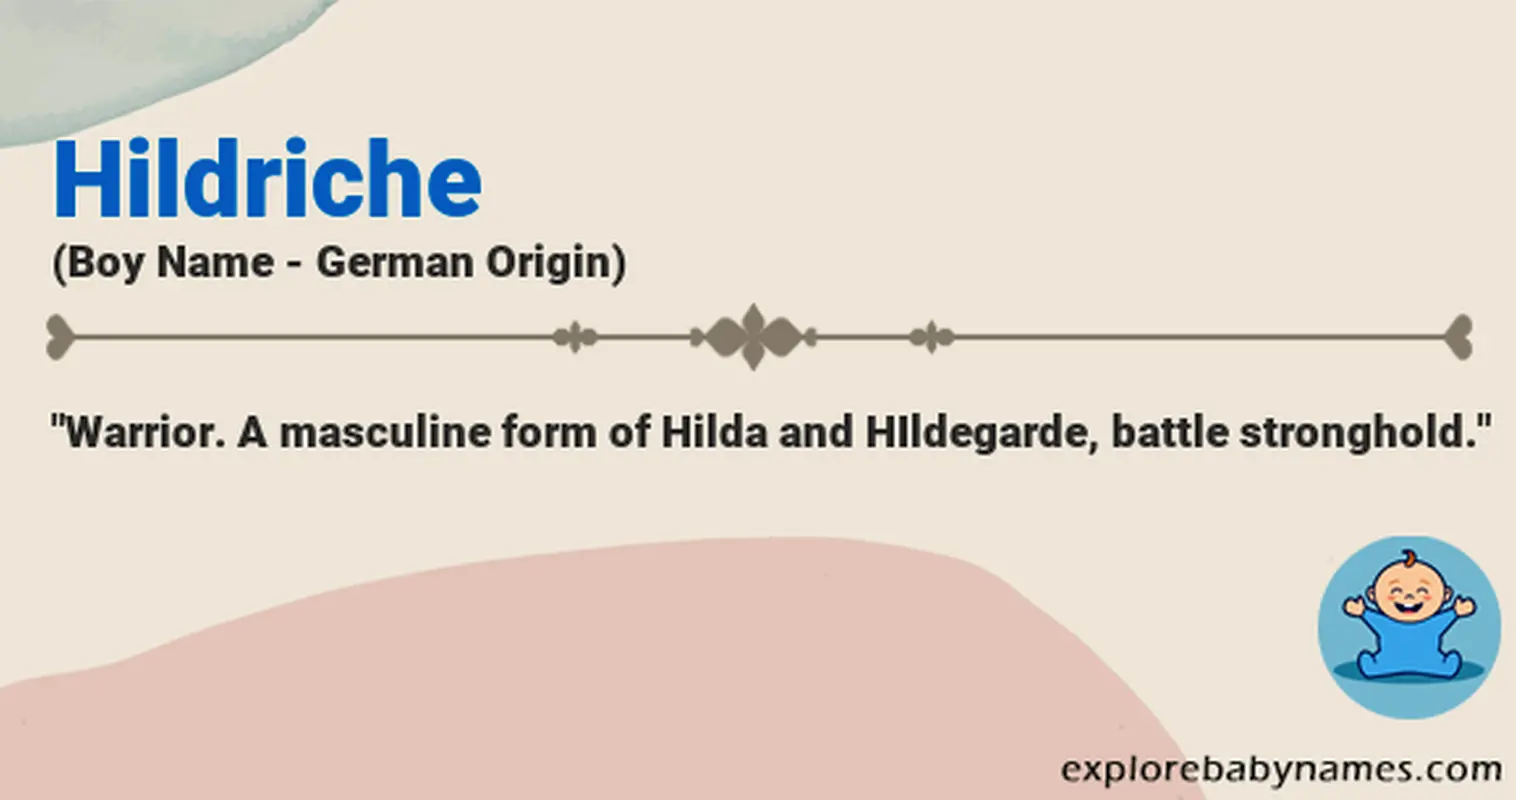 Meaning of Hildriche